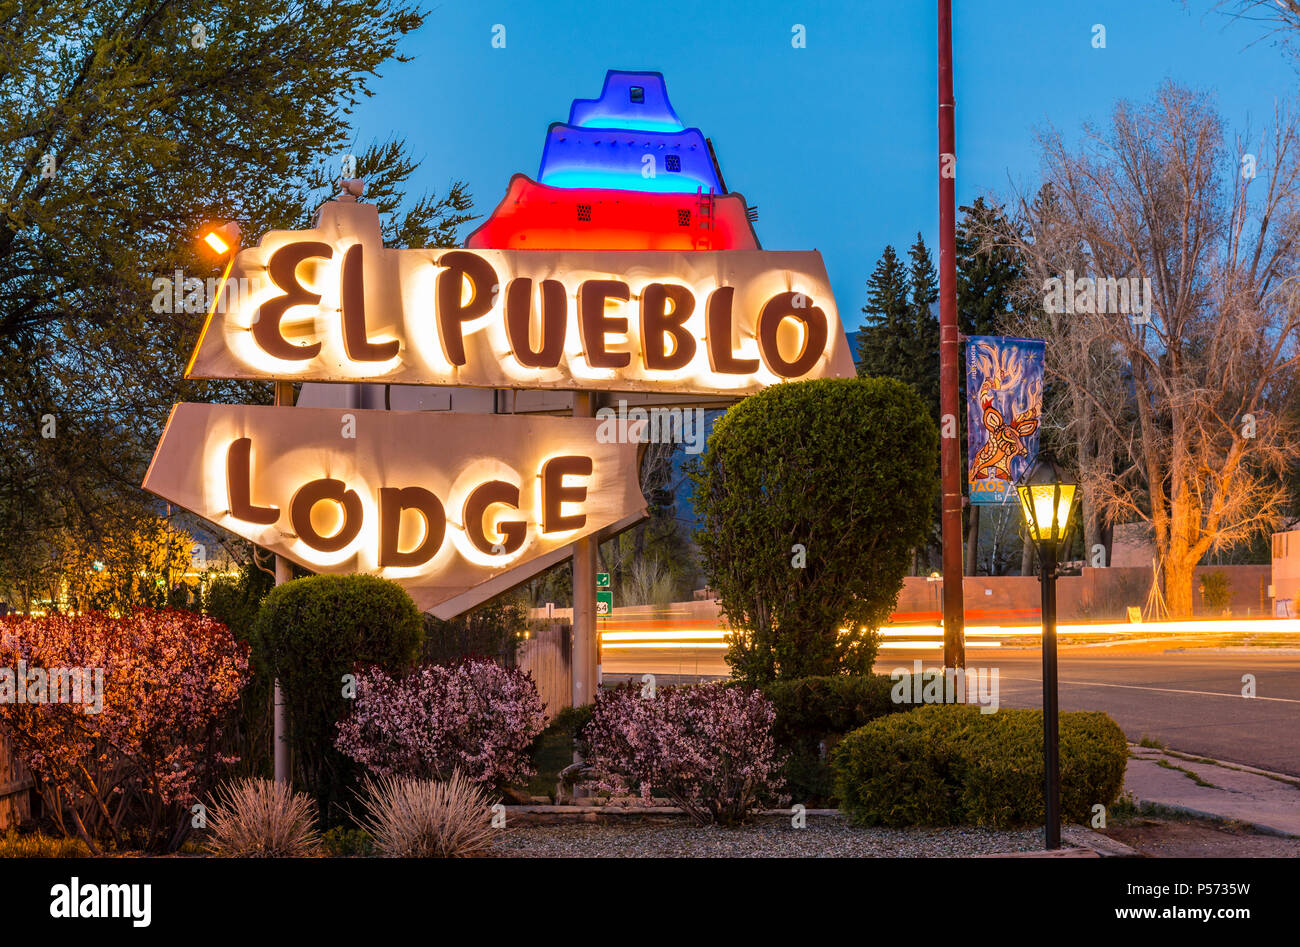 El Pueblo Lodge vintage, retro neon sign at night with traffic light streaks in Taos, New Mexico USA. Stock Photo